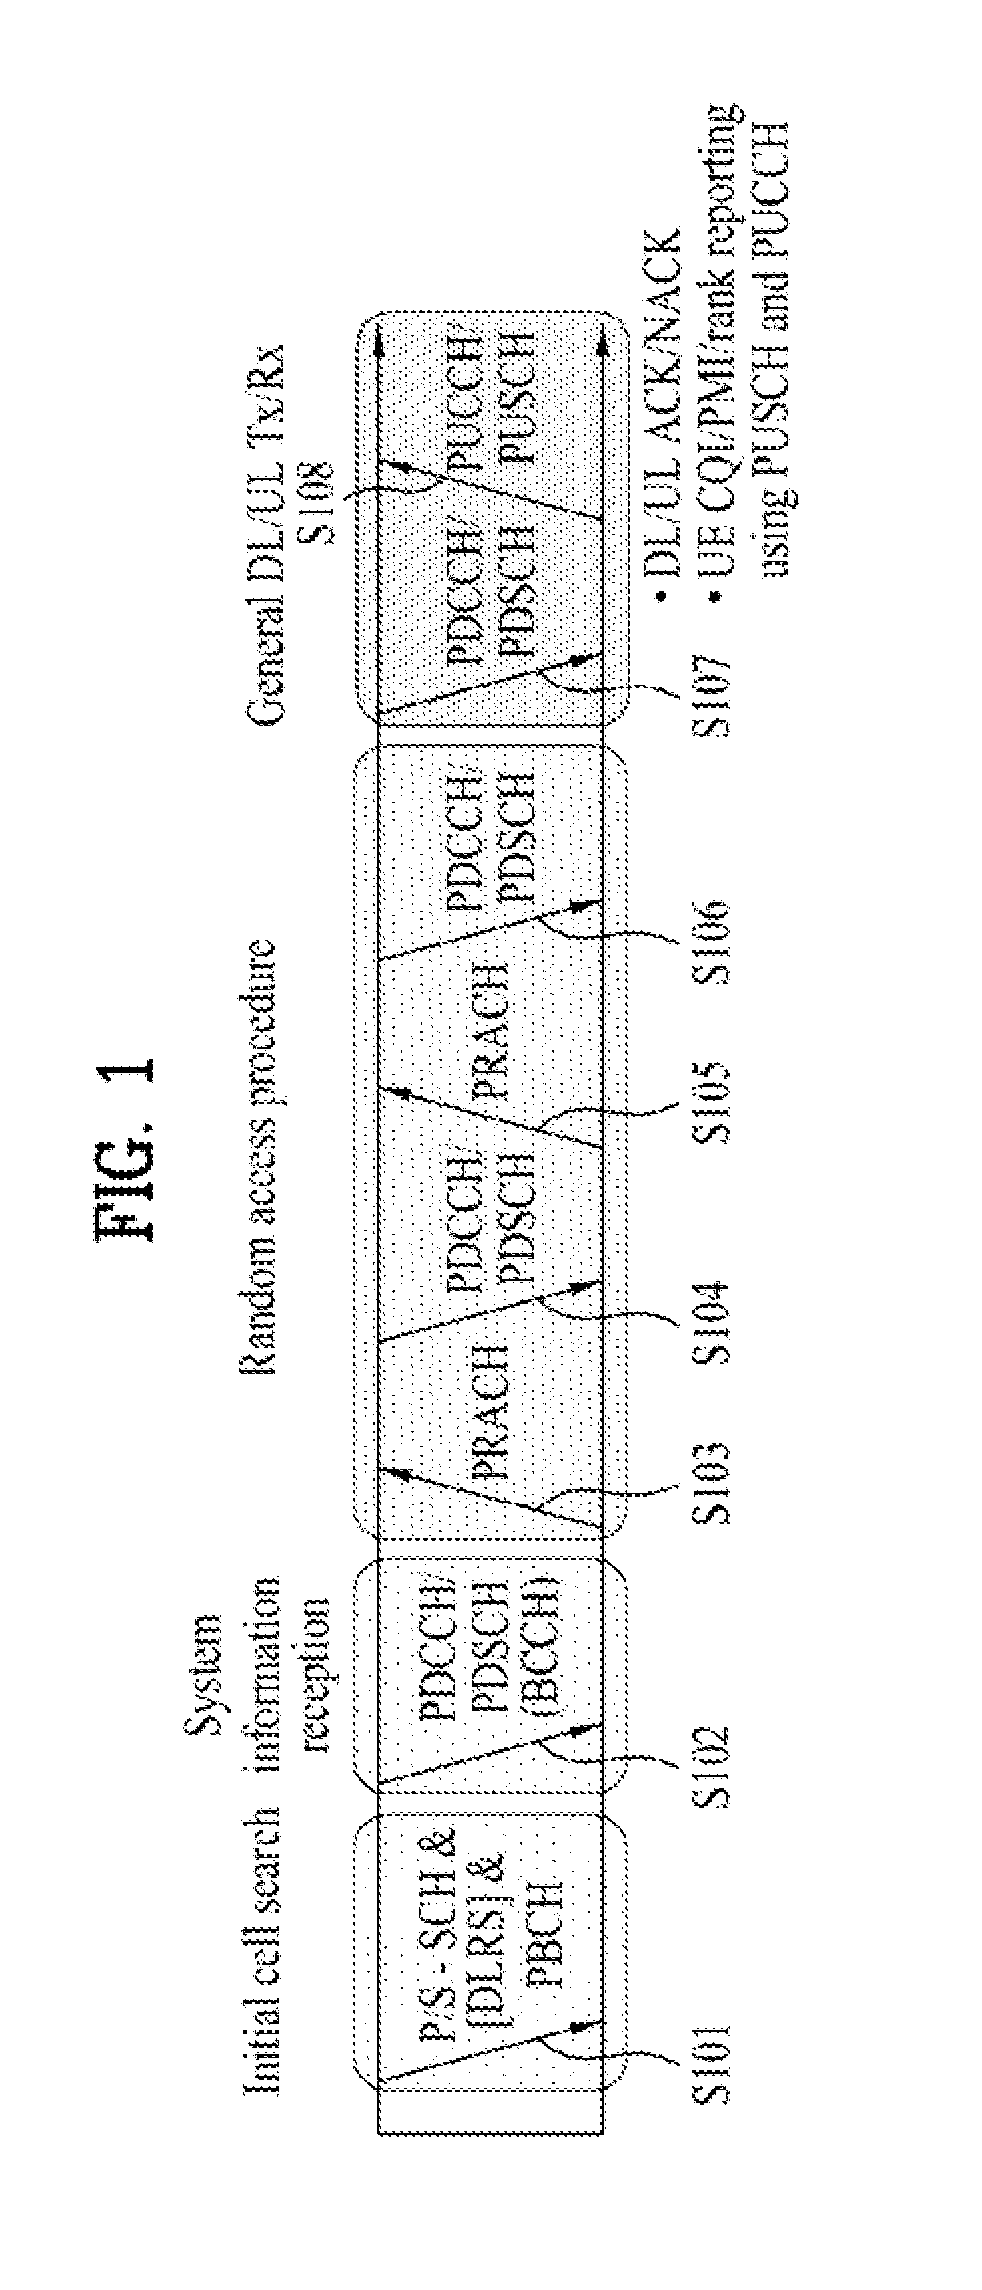 Method for transmitting control information in a wireless communication system, and device therefor